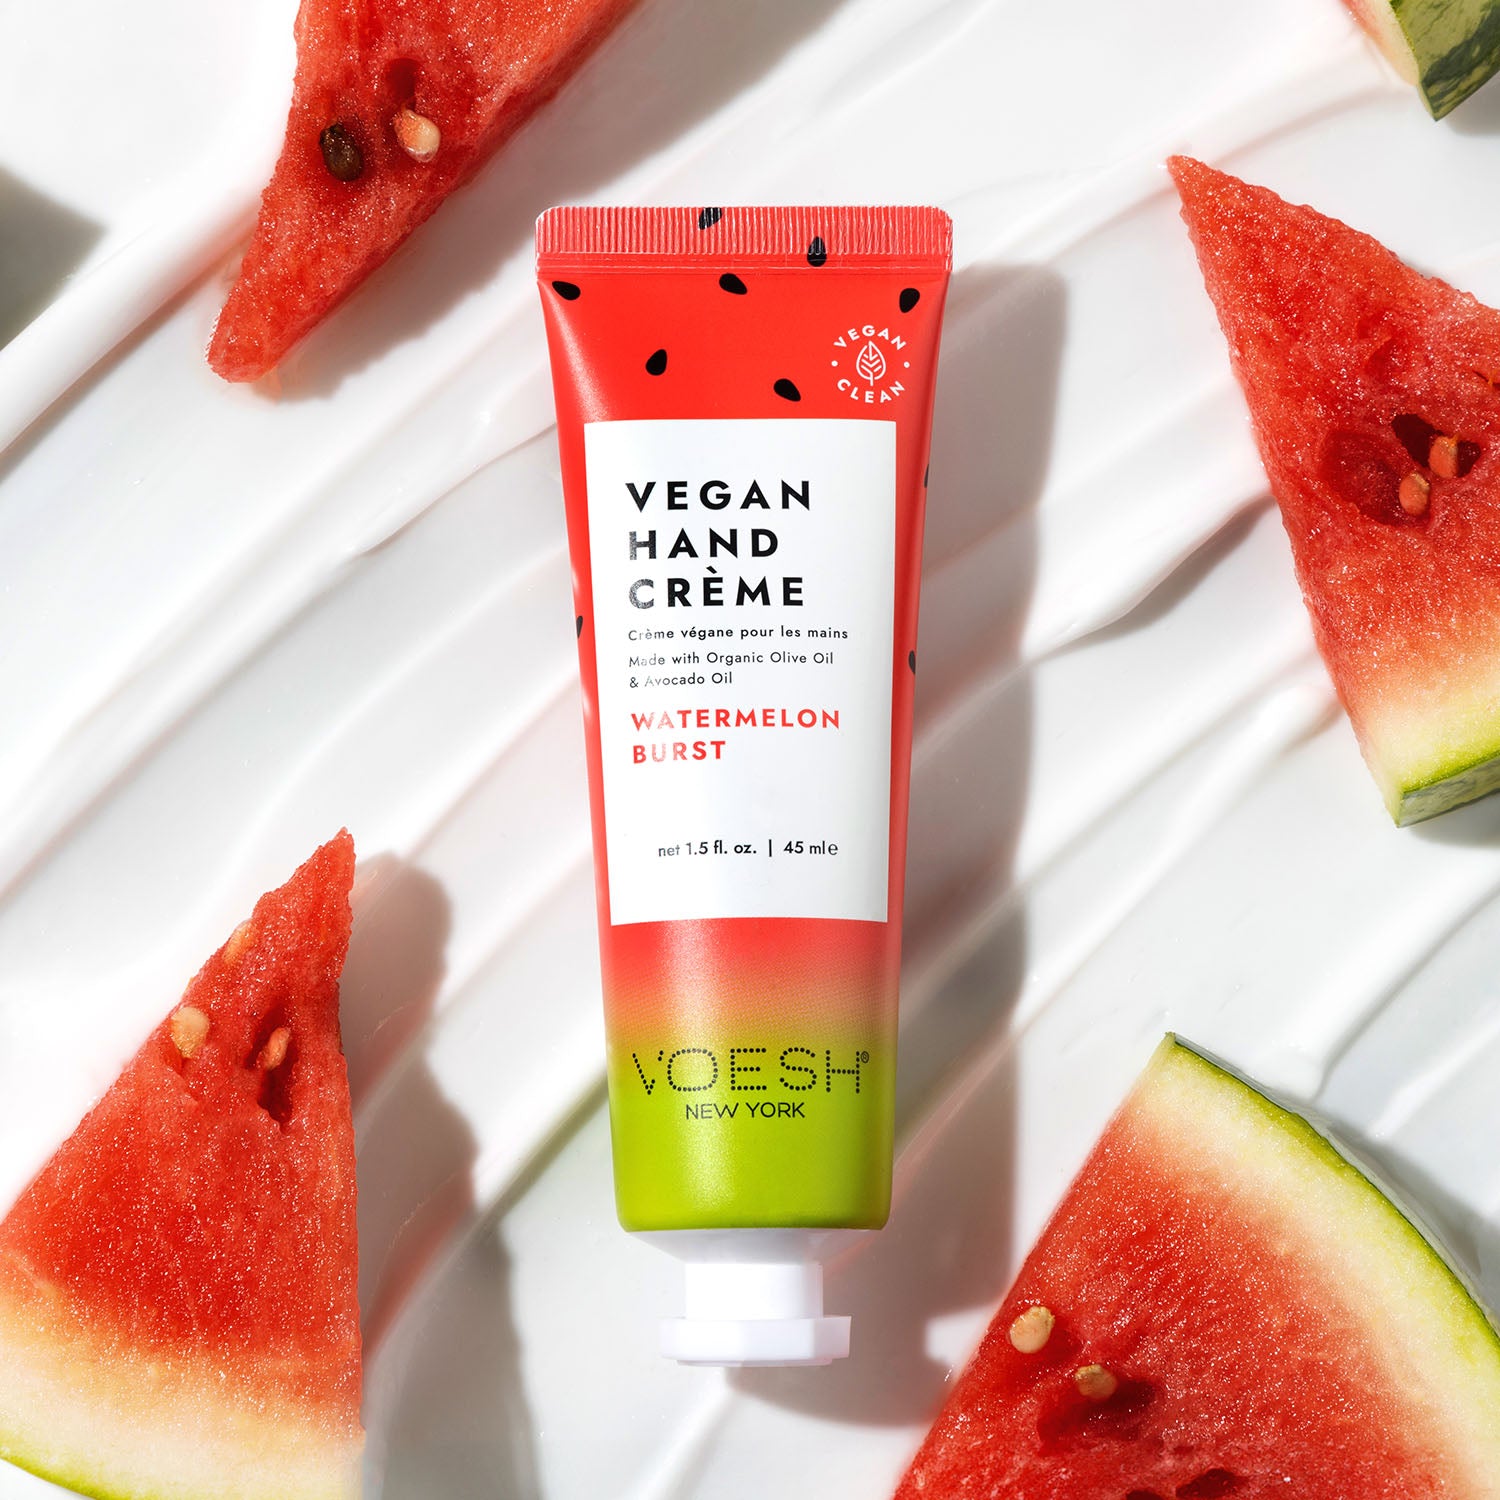 Watermelon Burst Vegan Hand Crème on top of lotion’s texture with watermelon slices.